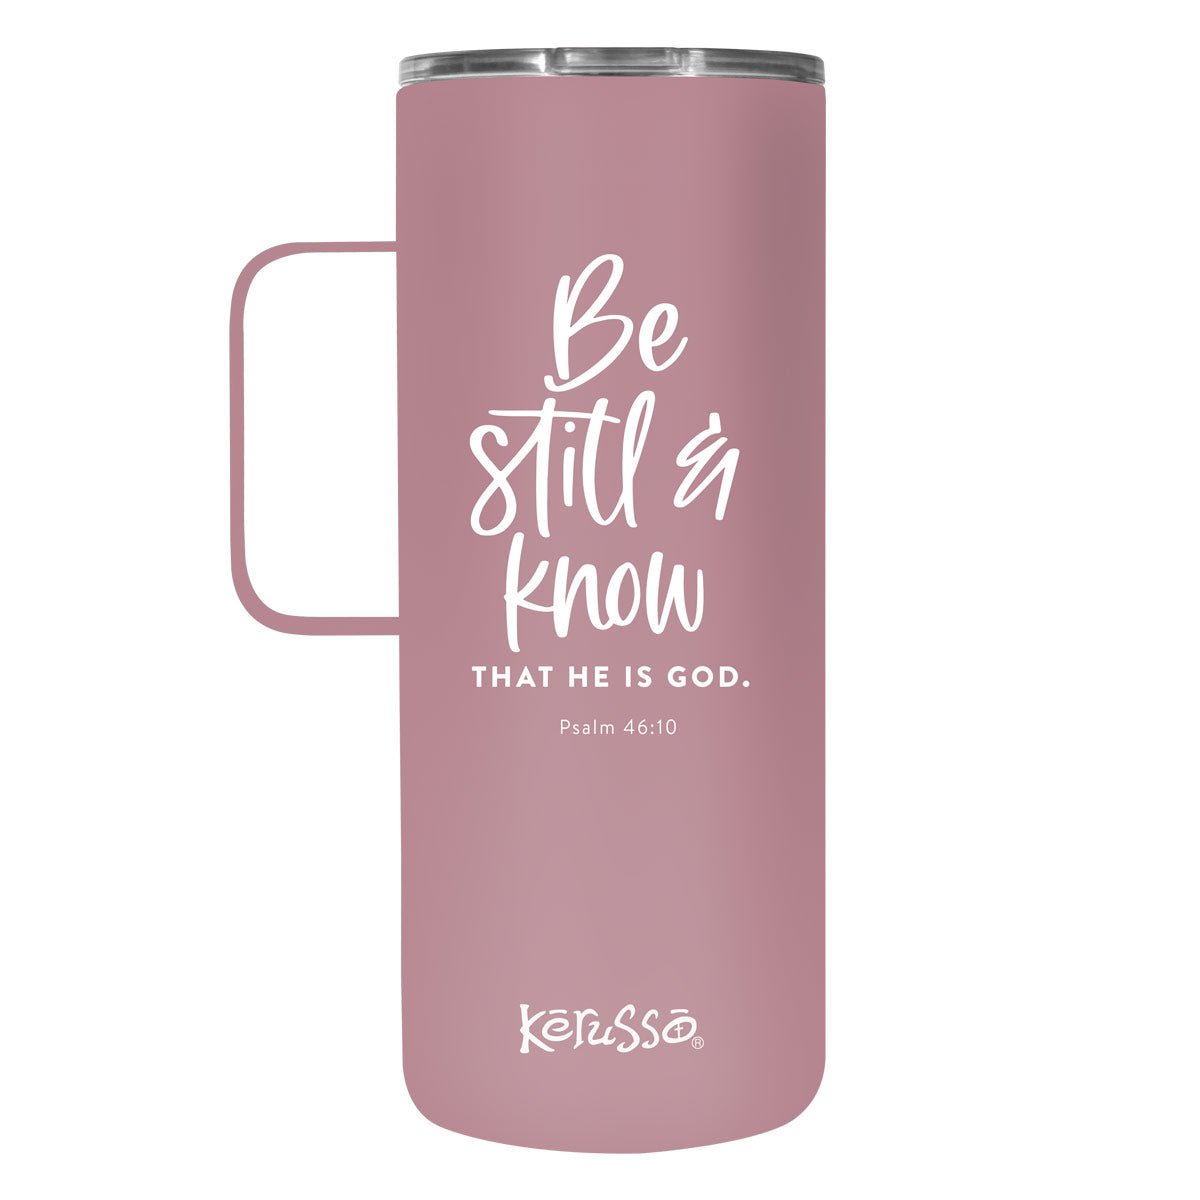 Kerusso 22 oz Stainless Steel Mug With Handle Be Still & Know | 2FruitBearers